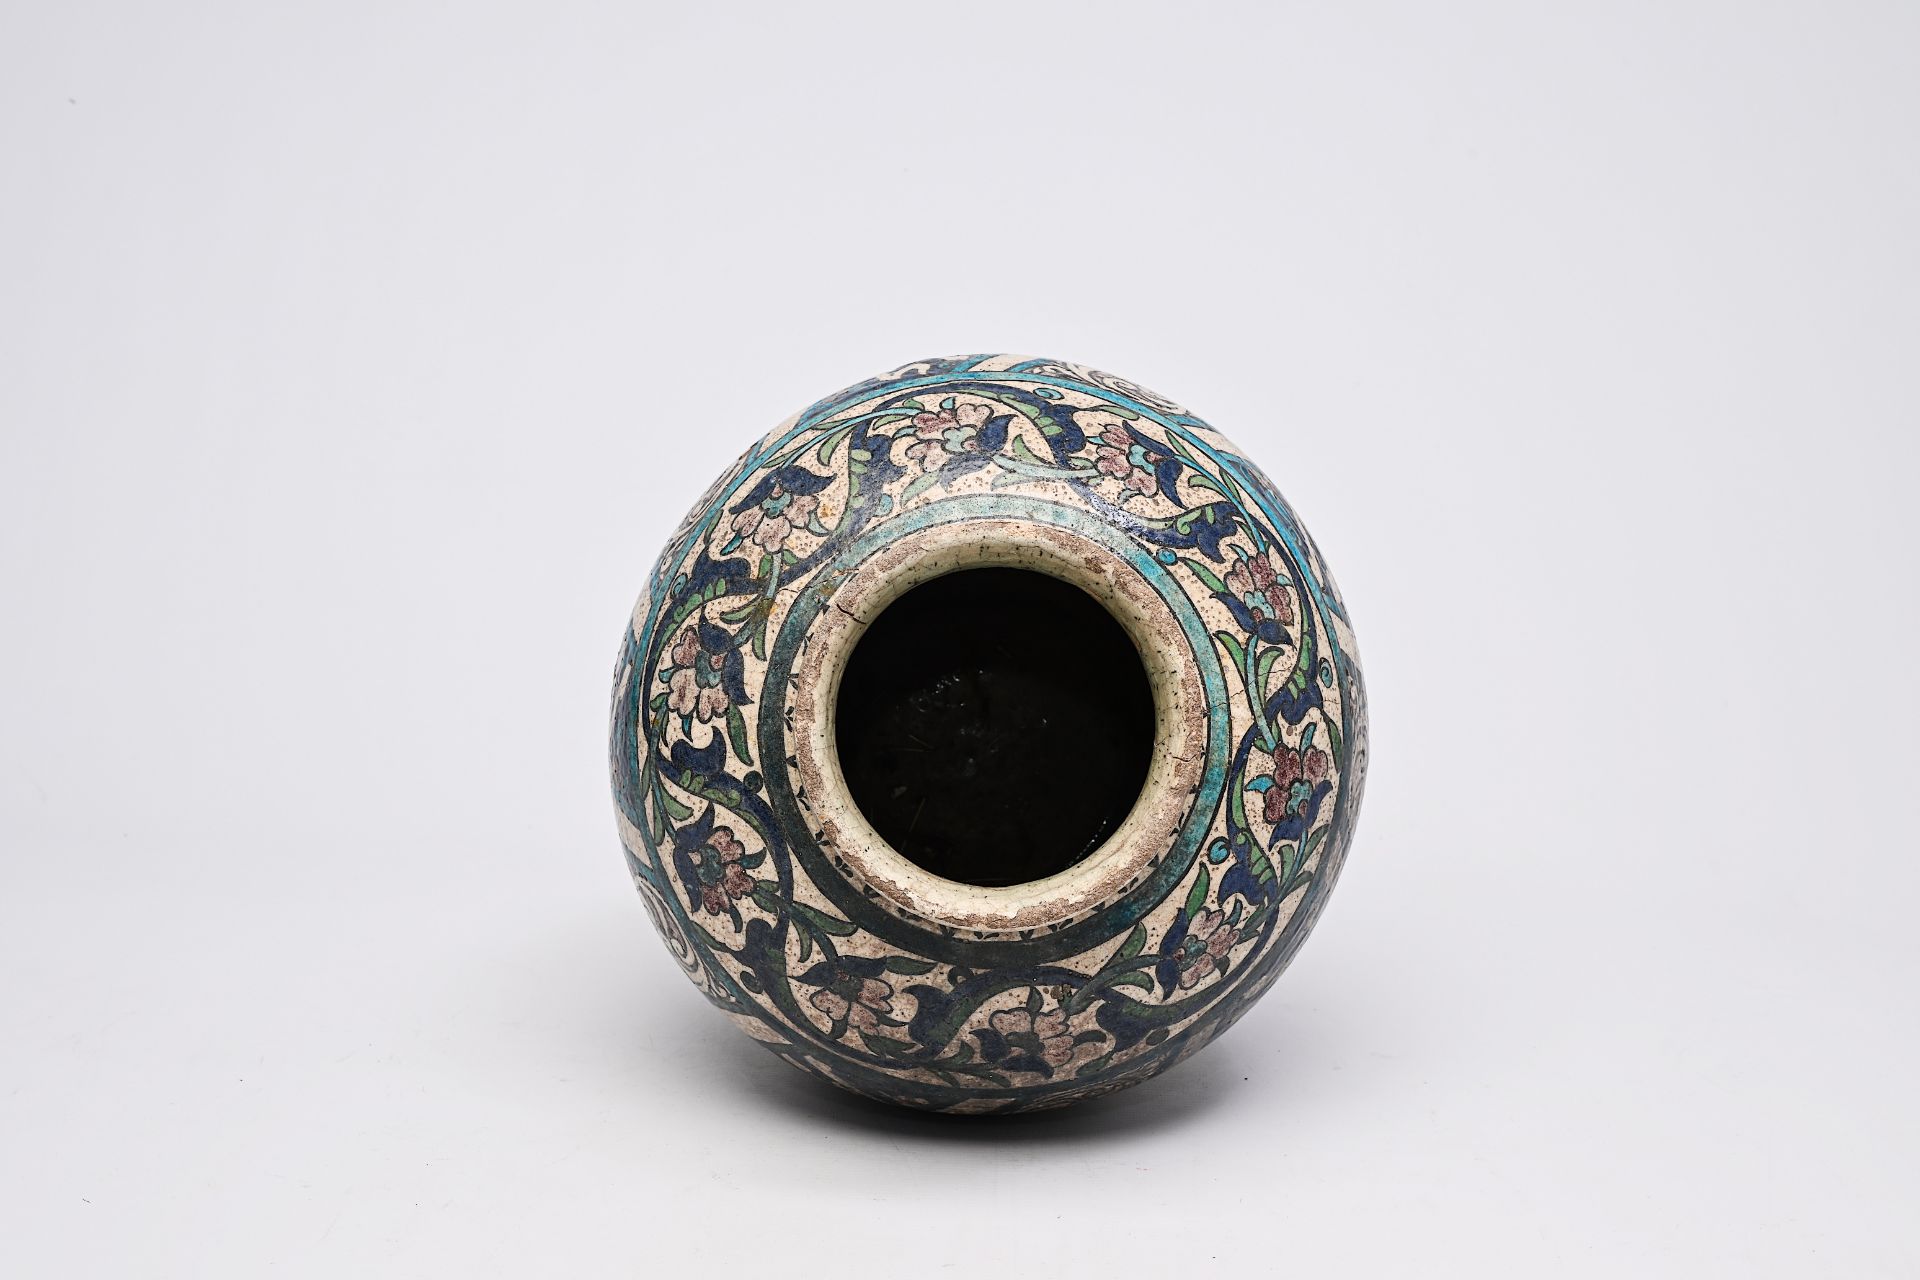 A polychrome pottery jar with floral and calligraphic design, Iran, 19th C. - Image 7 of 9